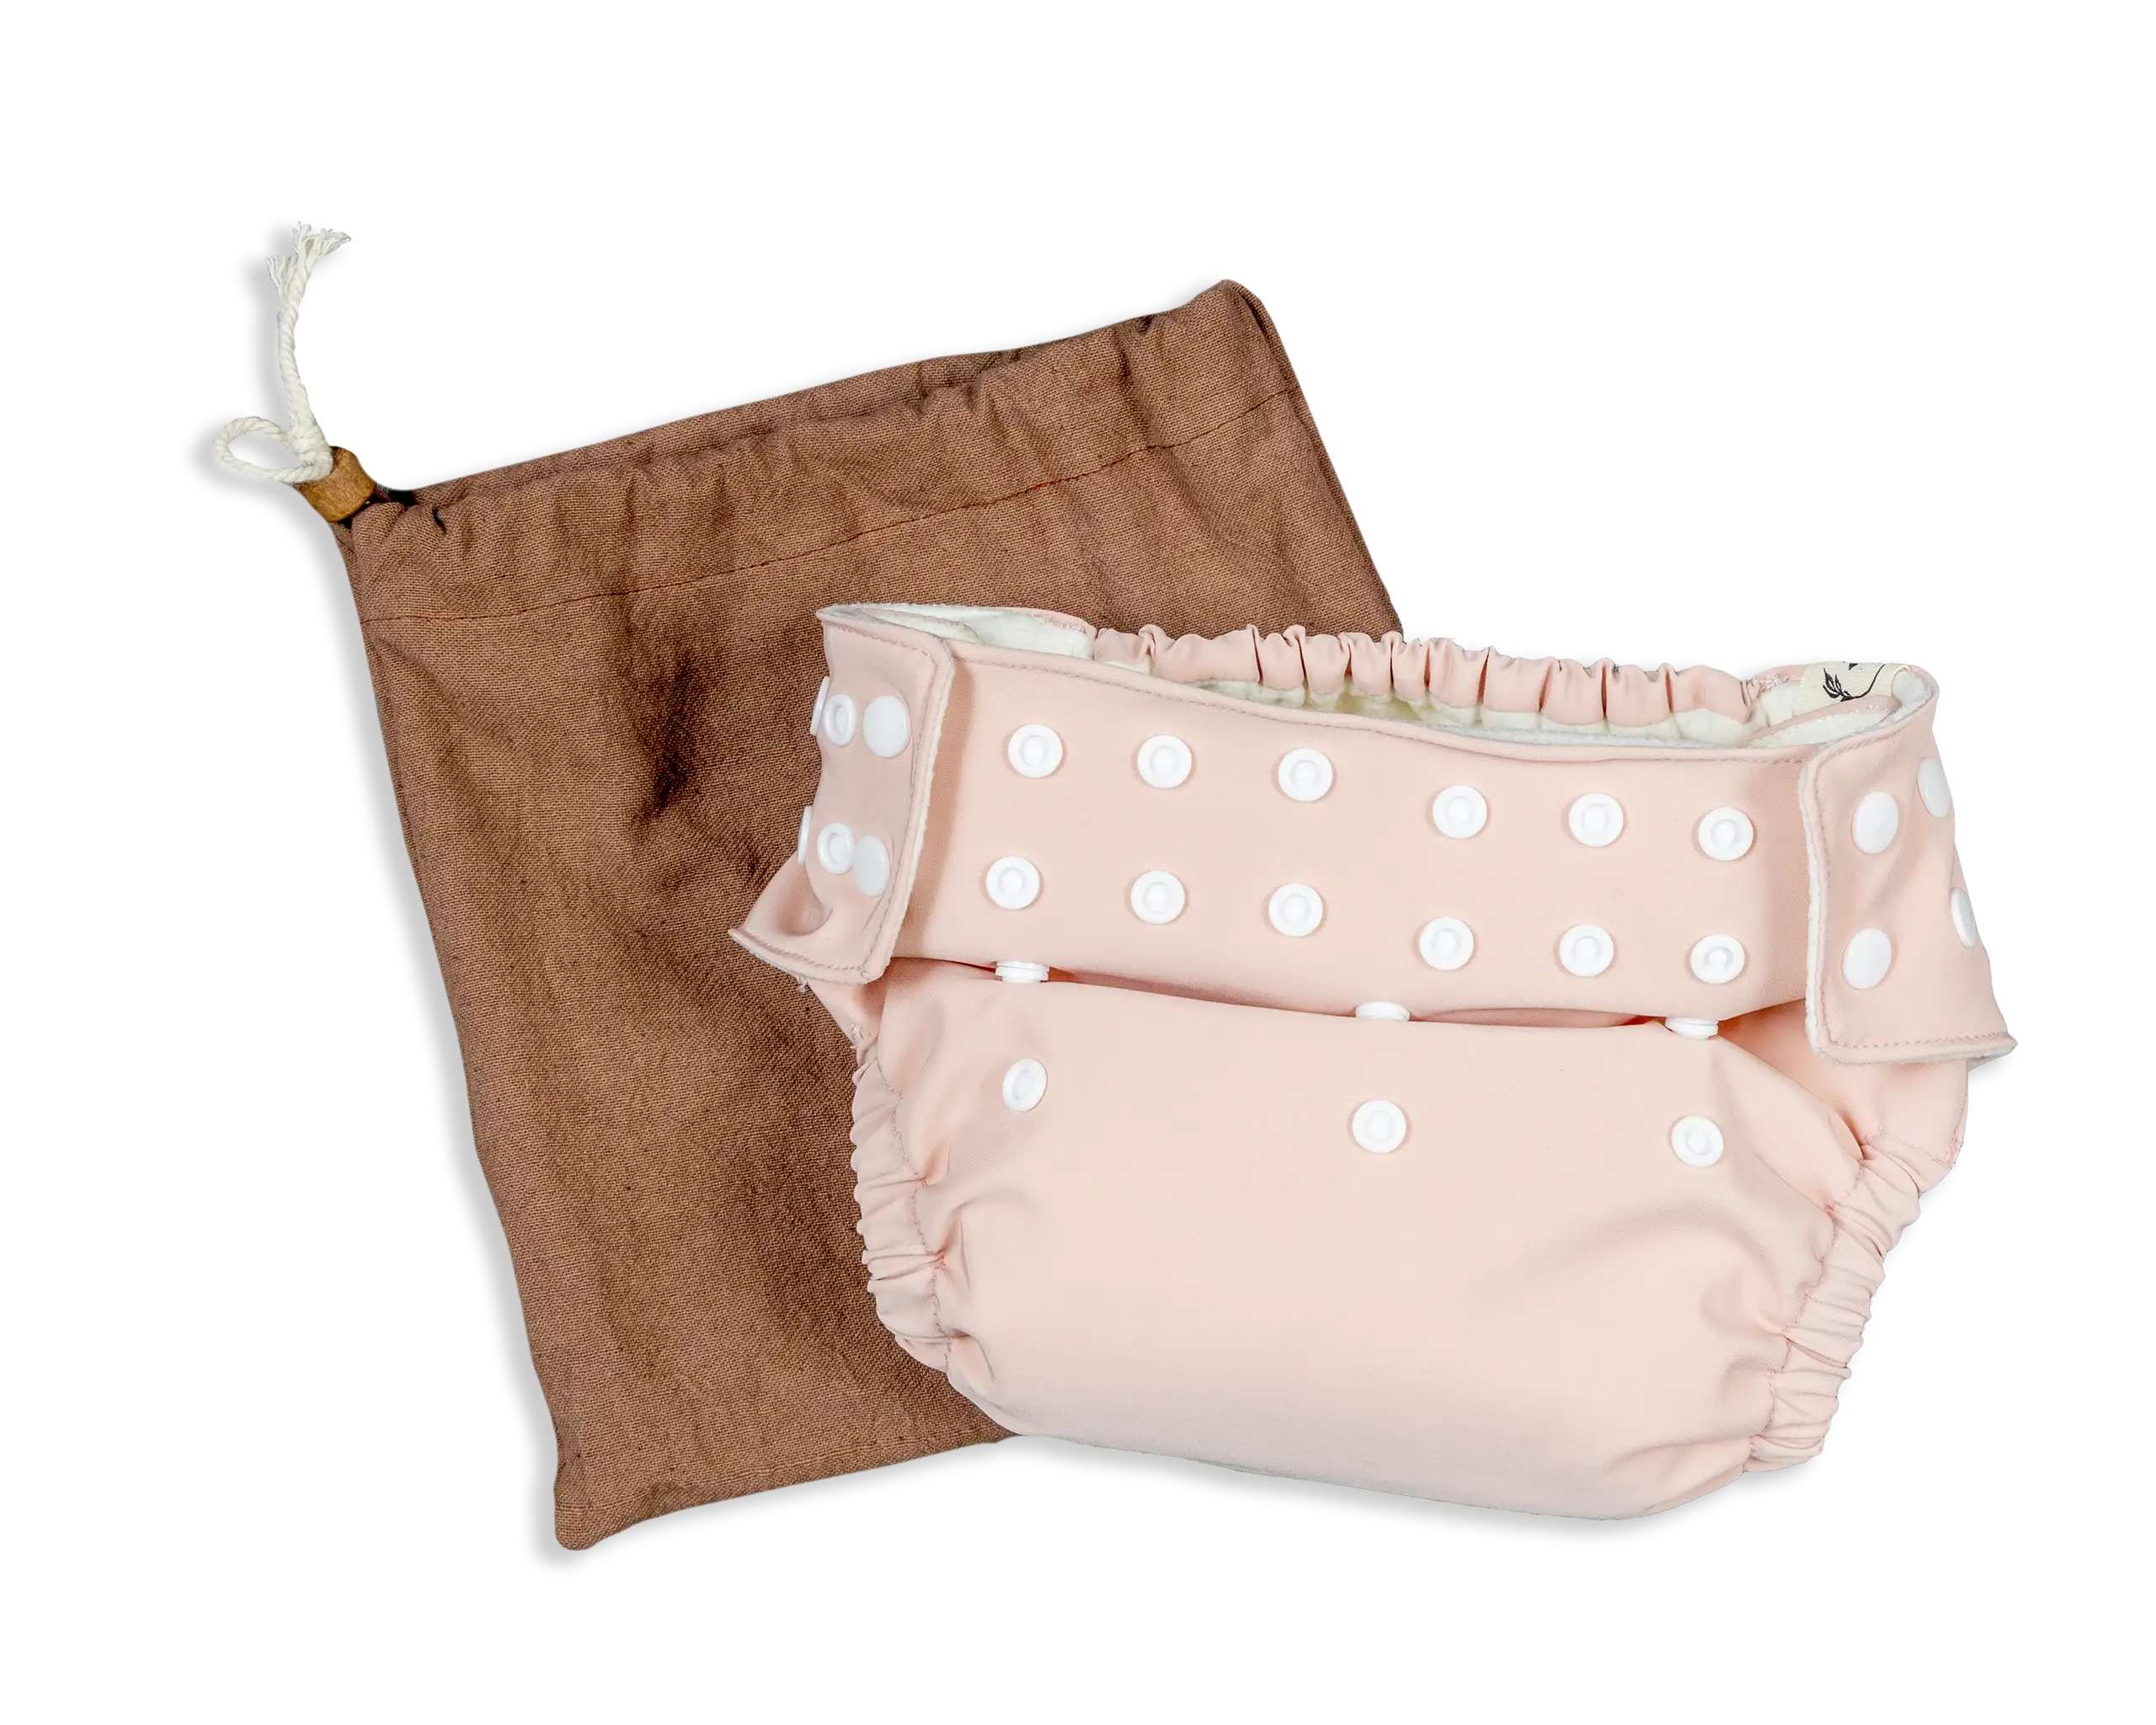 The Reusable Diaper is made with soft and breathable cotton, ensuring maximum comfort for your little one. Its adjustable snaps and flexible waistband make it easy to fit babies from 3 months to 3 years, growing with your child as they develop.